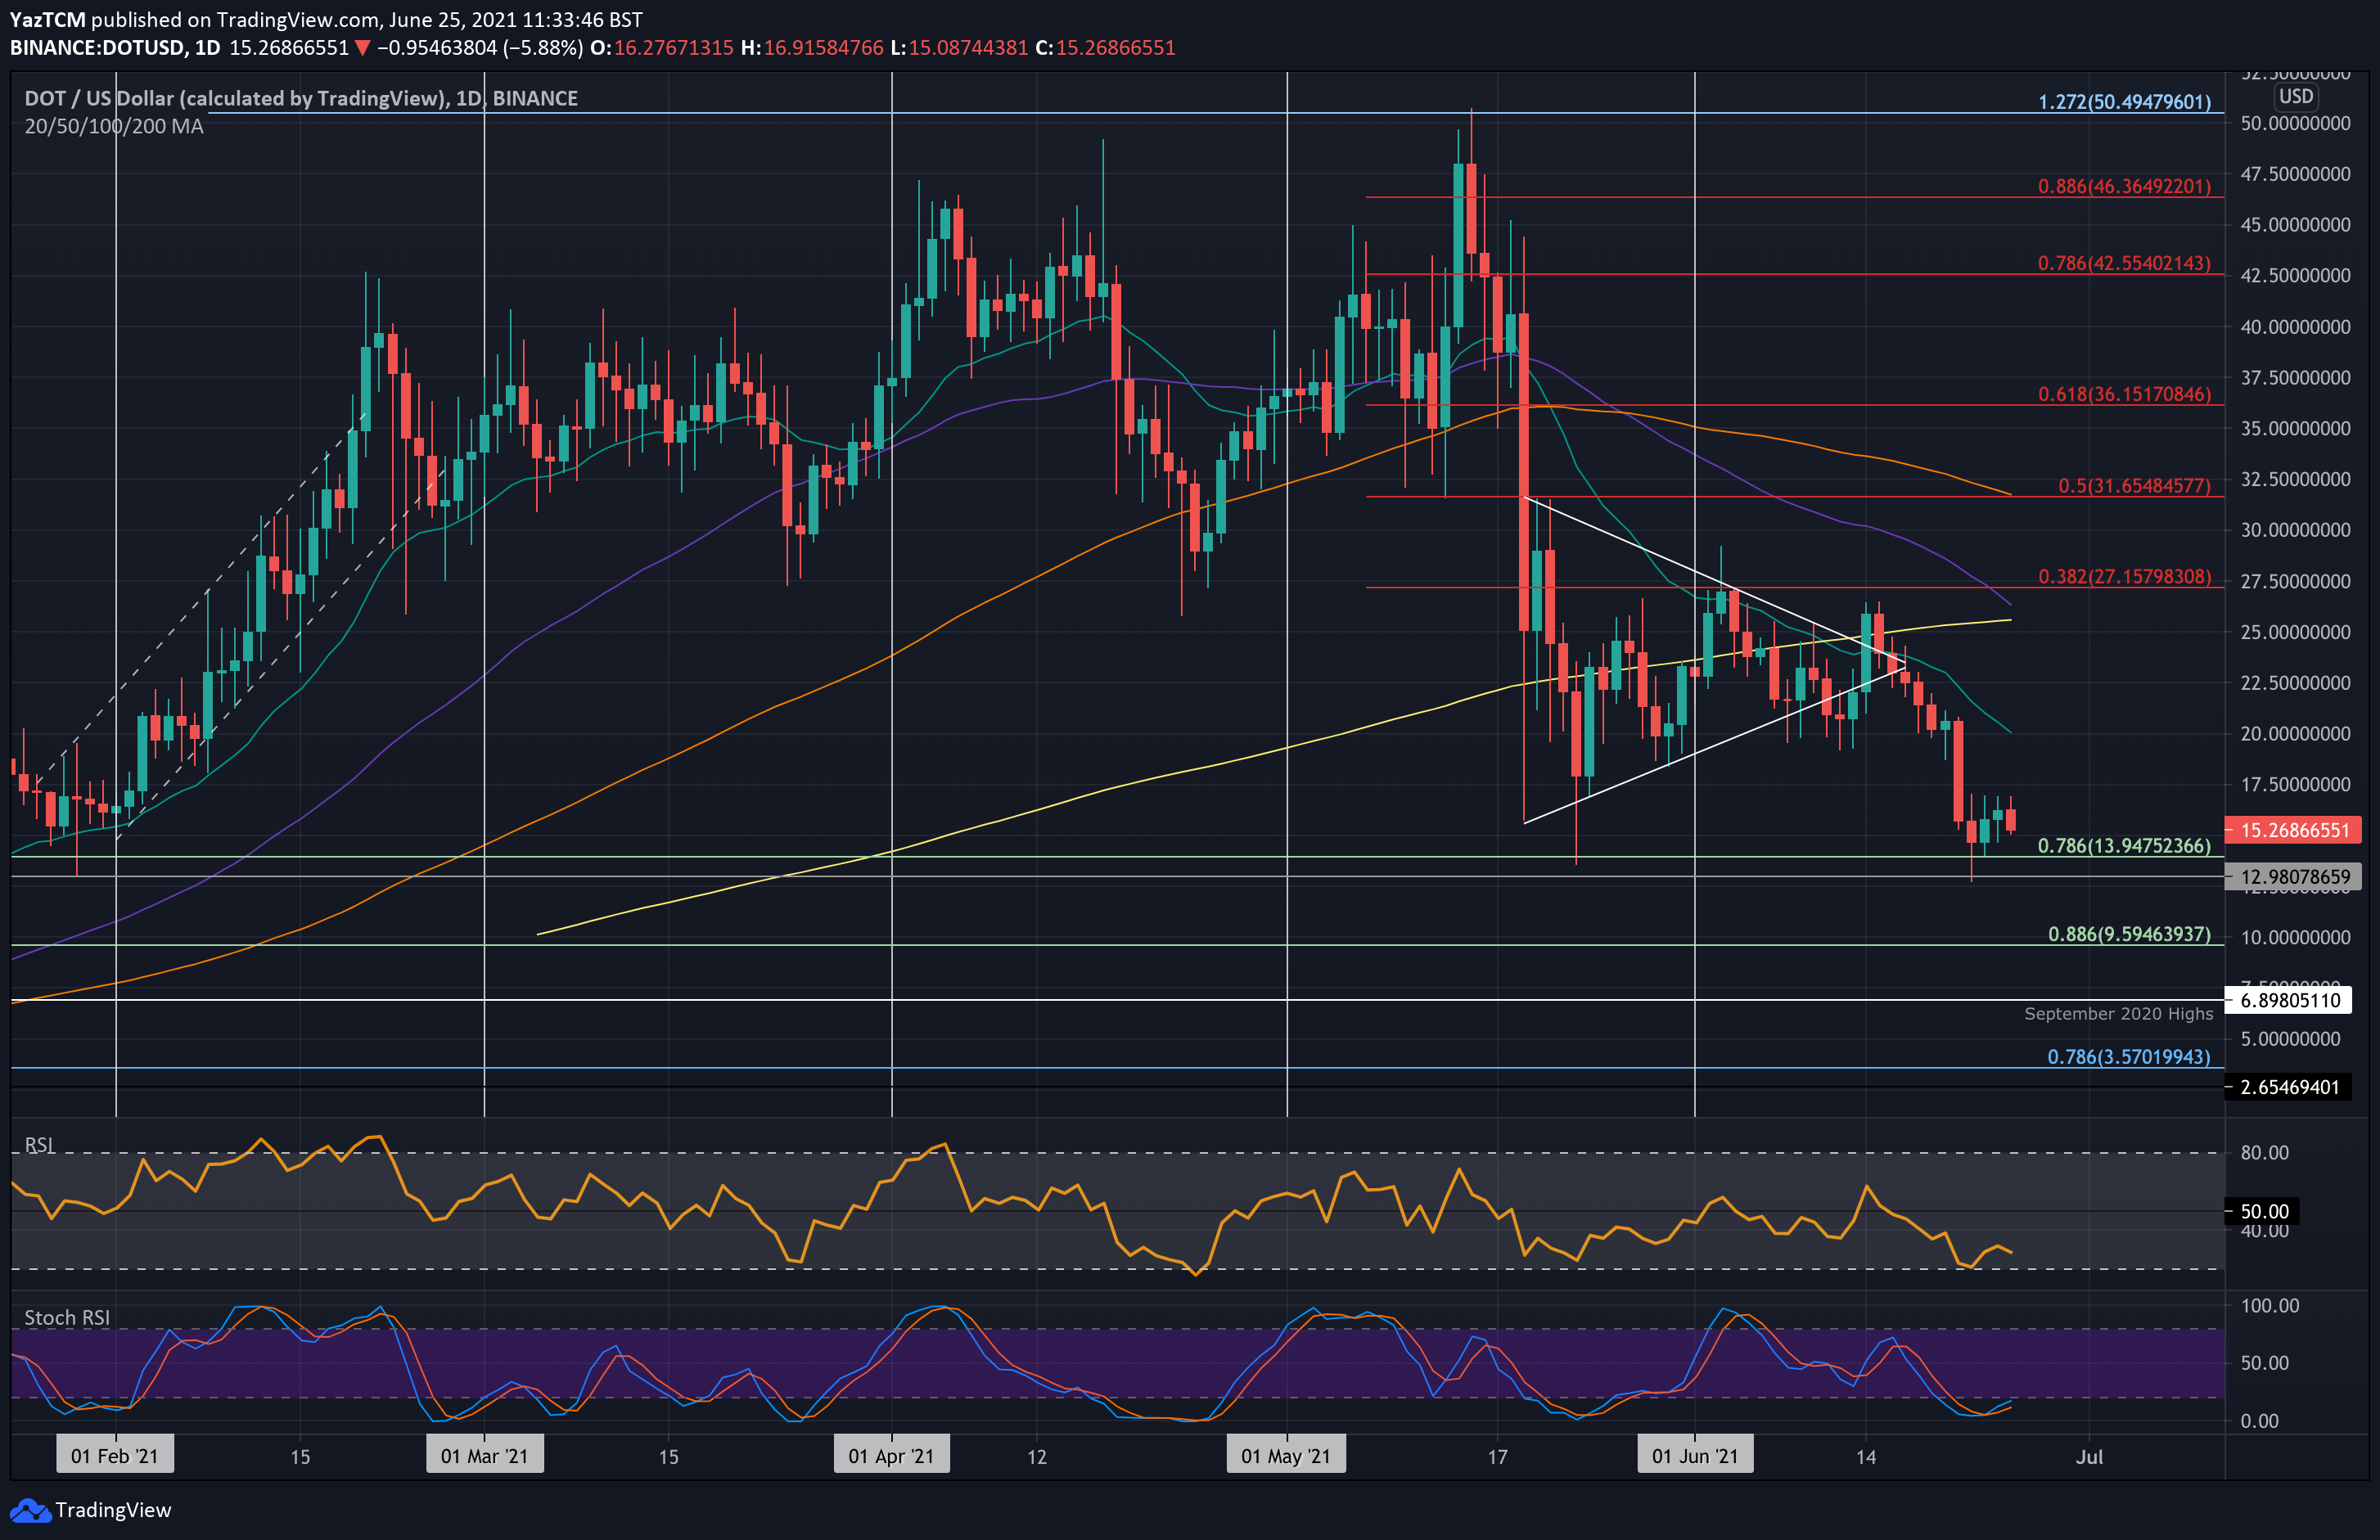 Crypto Price Analysis & Overview June 25th: Bitcoin, Ethereum, Ripple, Cardano, and Polkadot